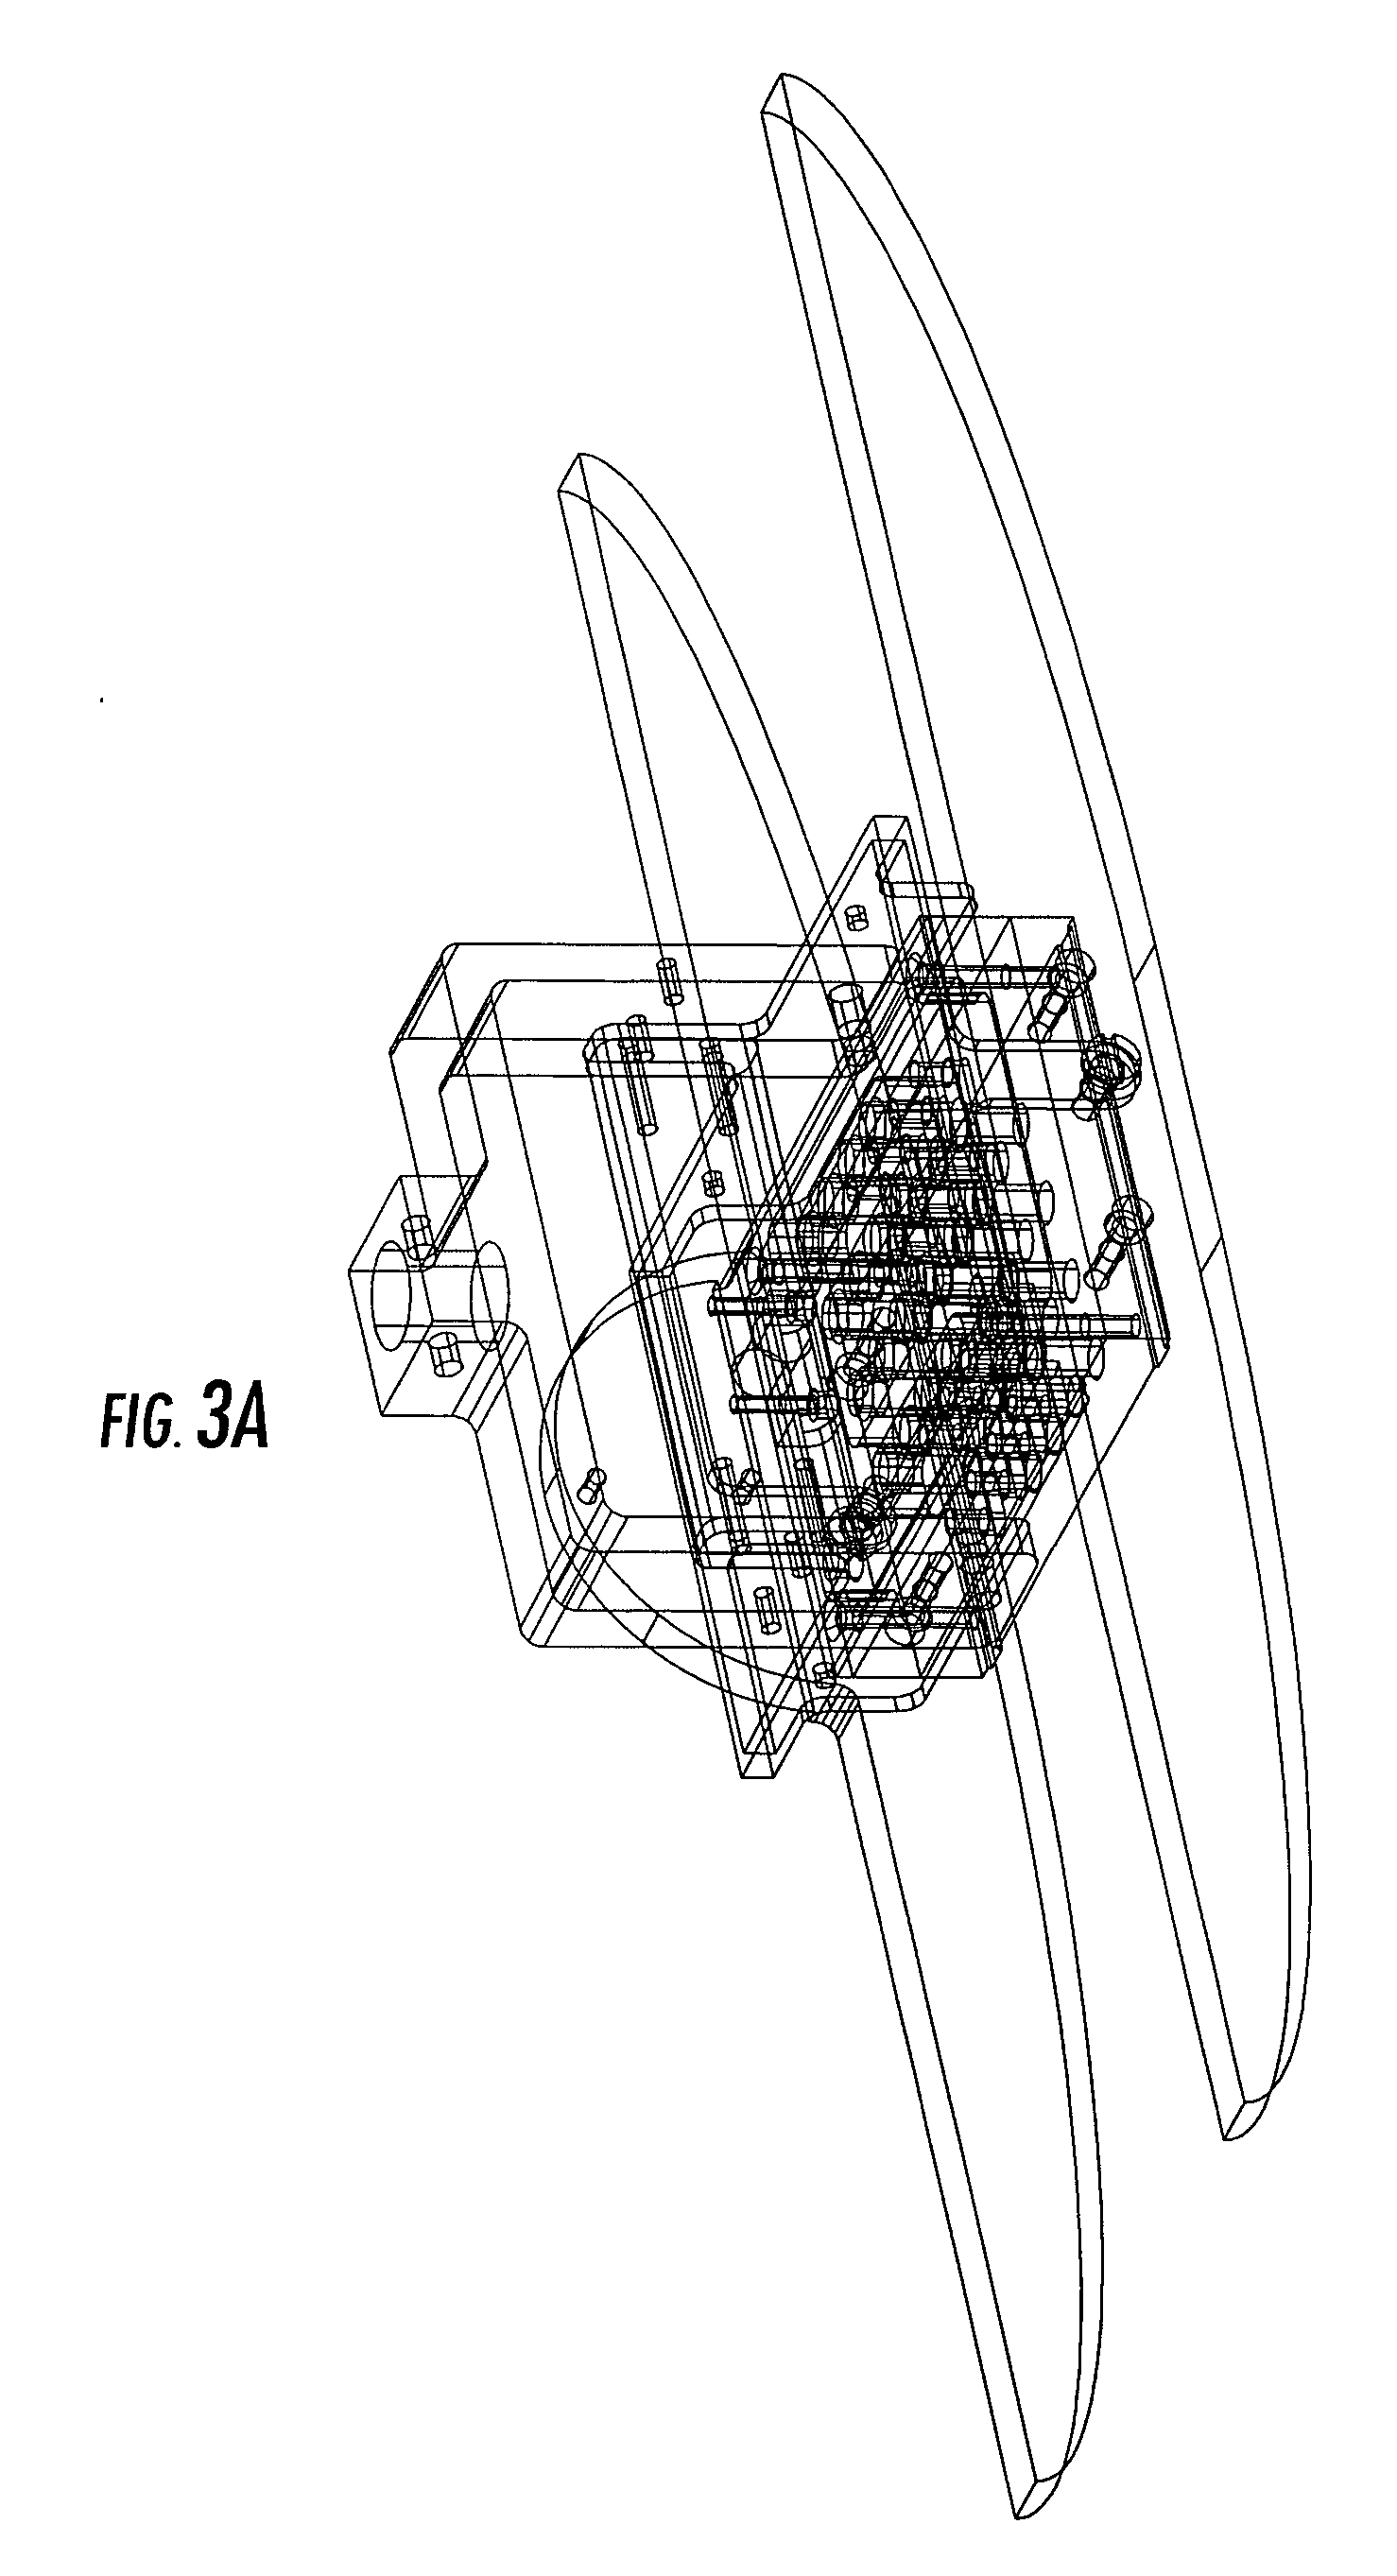 Ultrasonic array probe apparatus, system, and method for traveling over holes and off edges of a structure